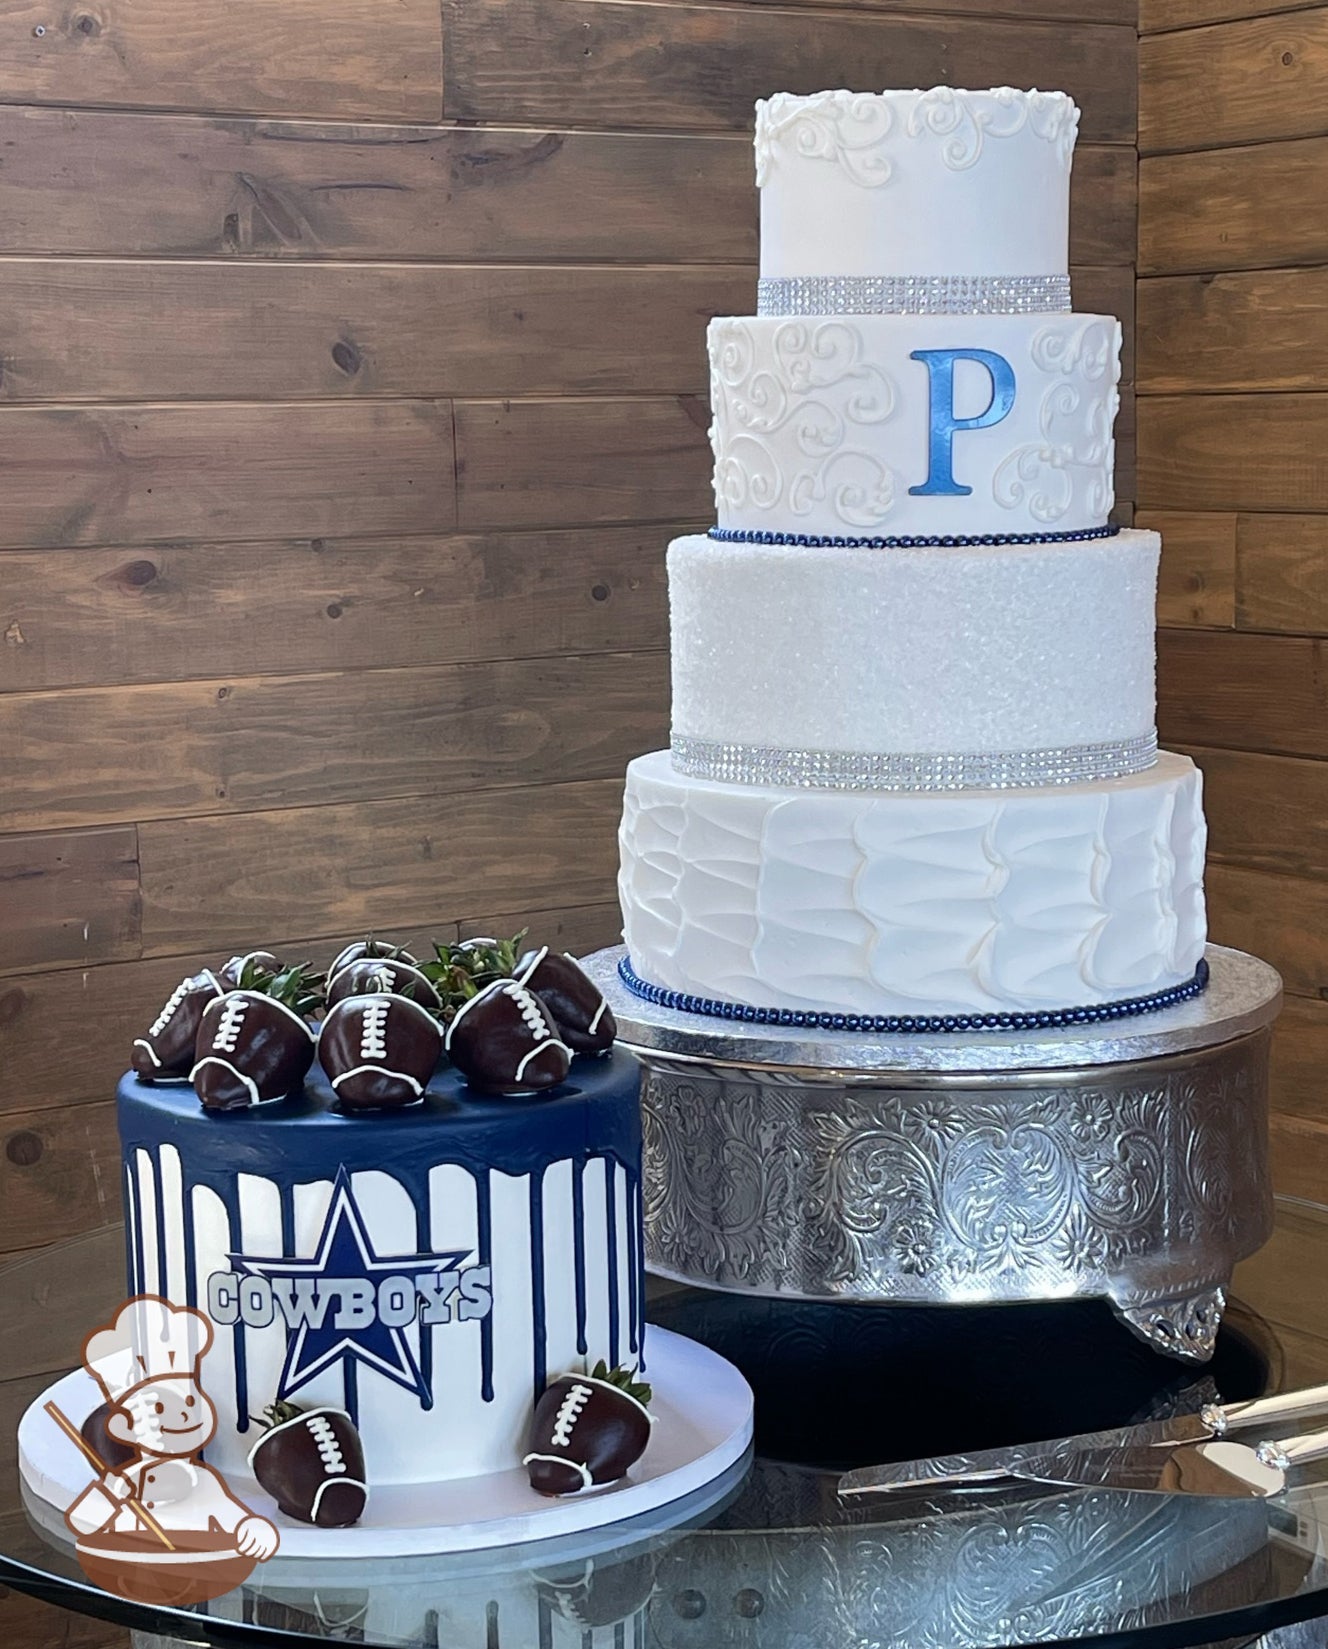 1-tier Dallas Cowboys Football team caked with blue drip decoration, presented infront of the 4-tier cake on silver cake stand.